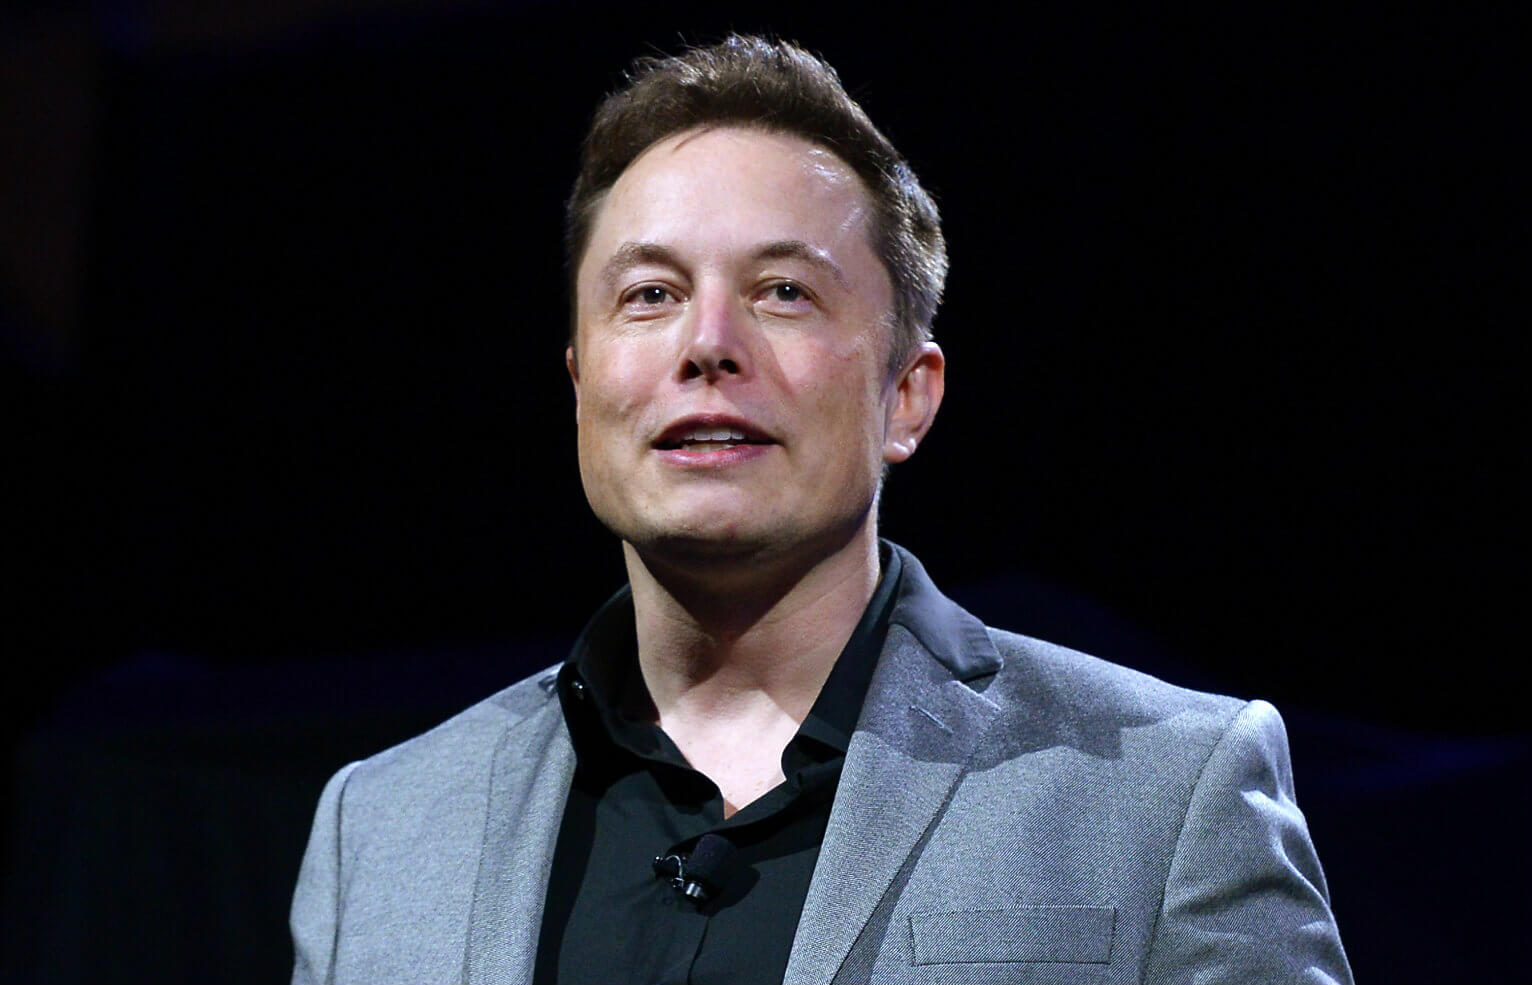 Elon Musk Announces He is Temporarily Halting Twitter Purchase